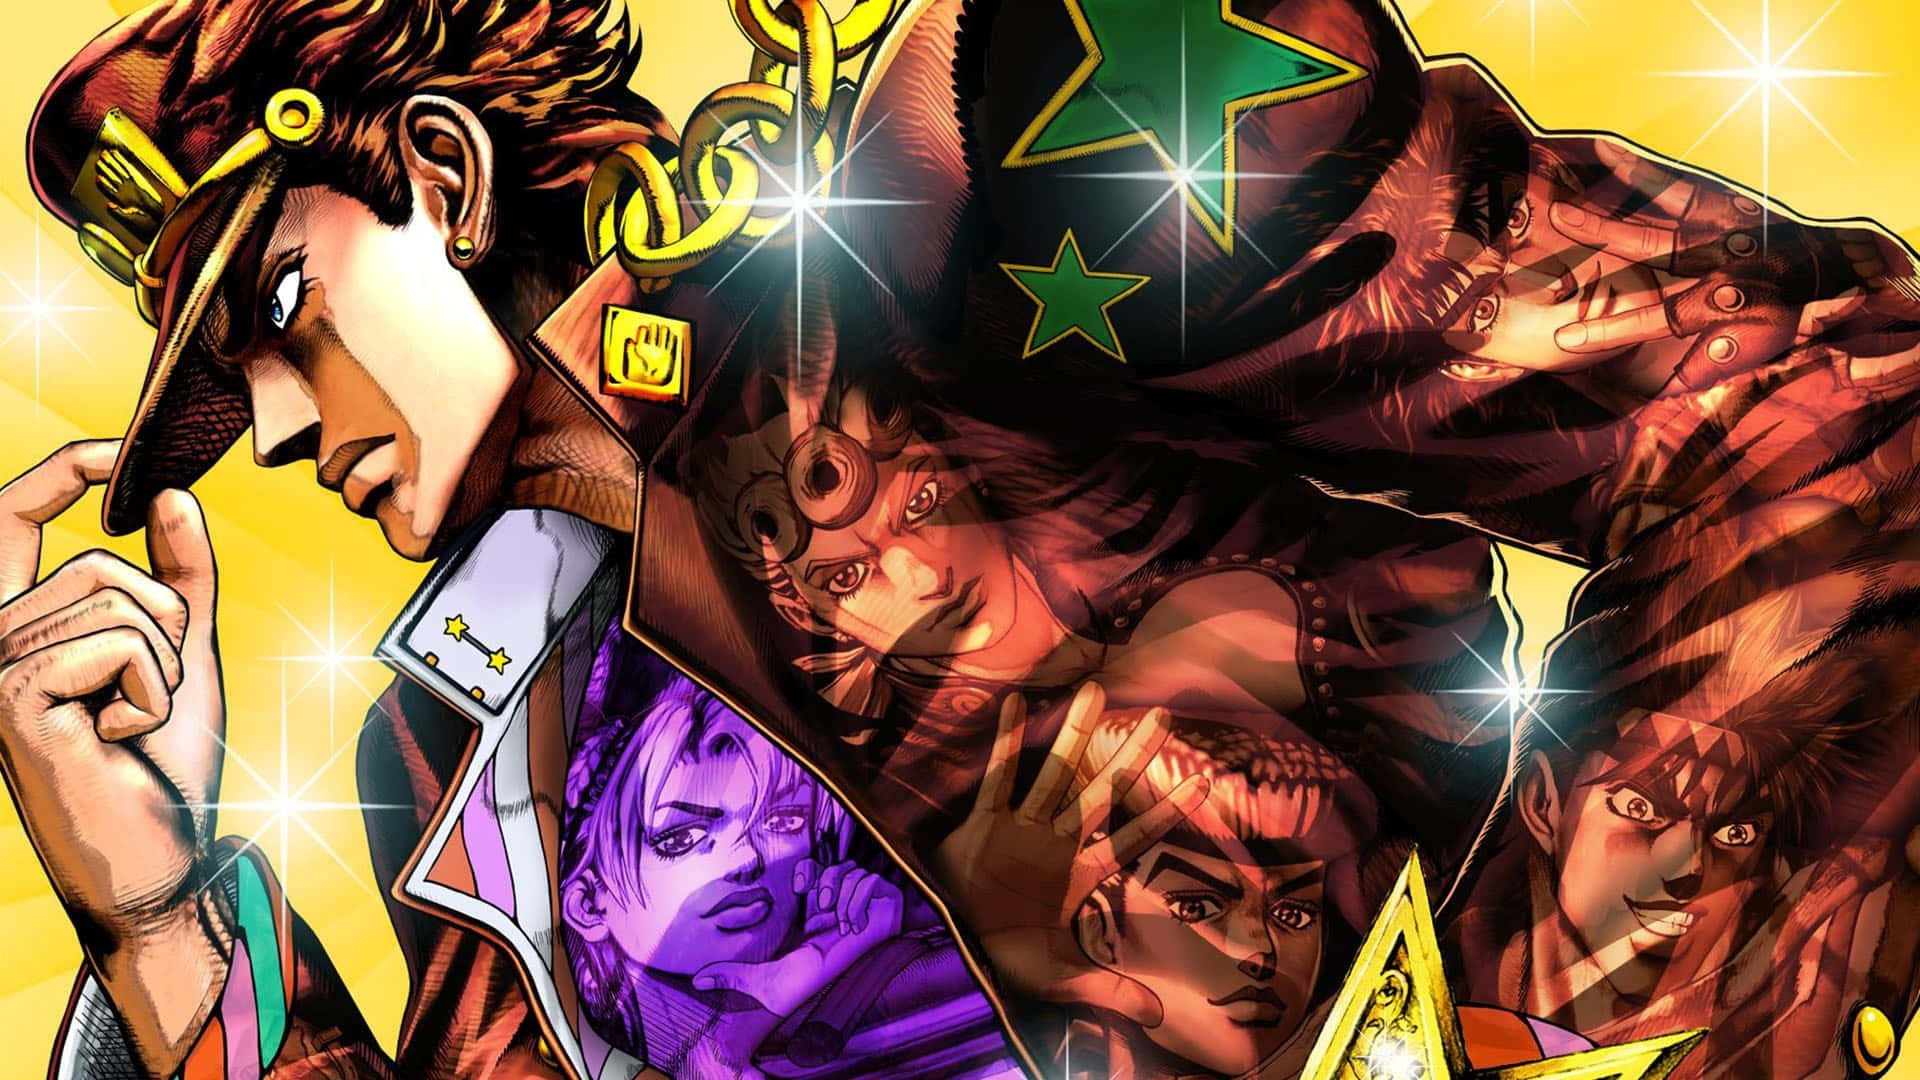 The heroes of Jojo's Bizarre Adventure standing atop a pile of rubble in a war-torn city